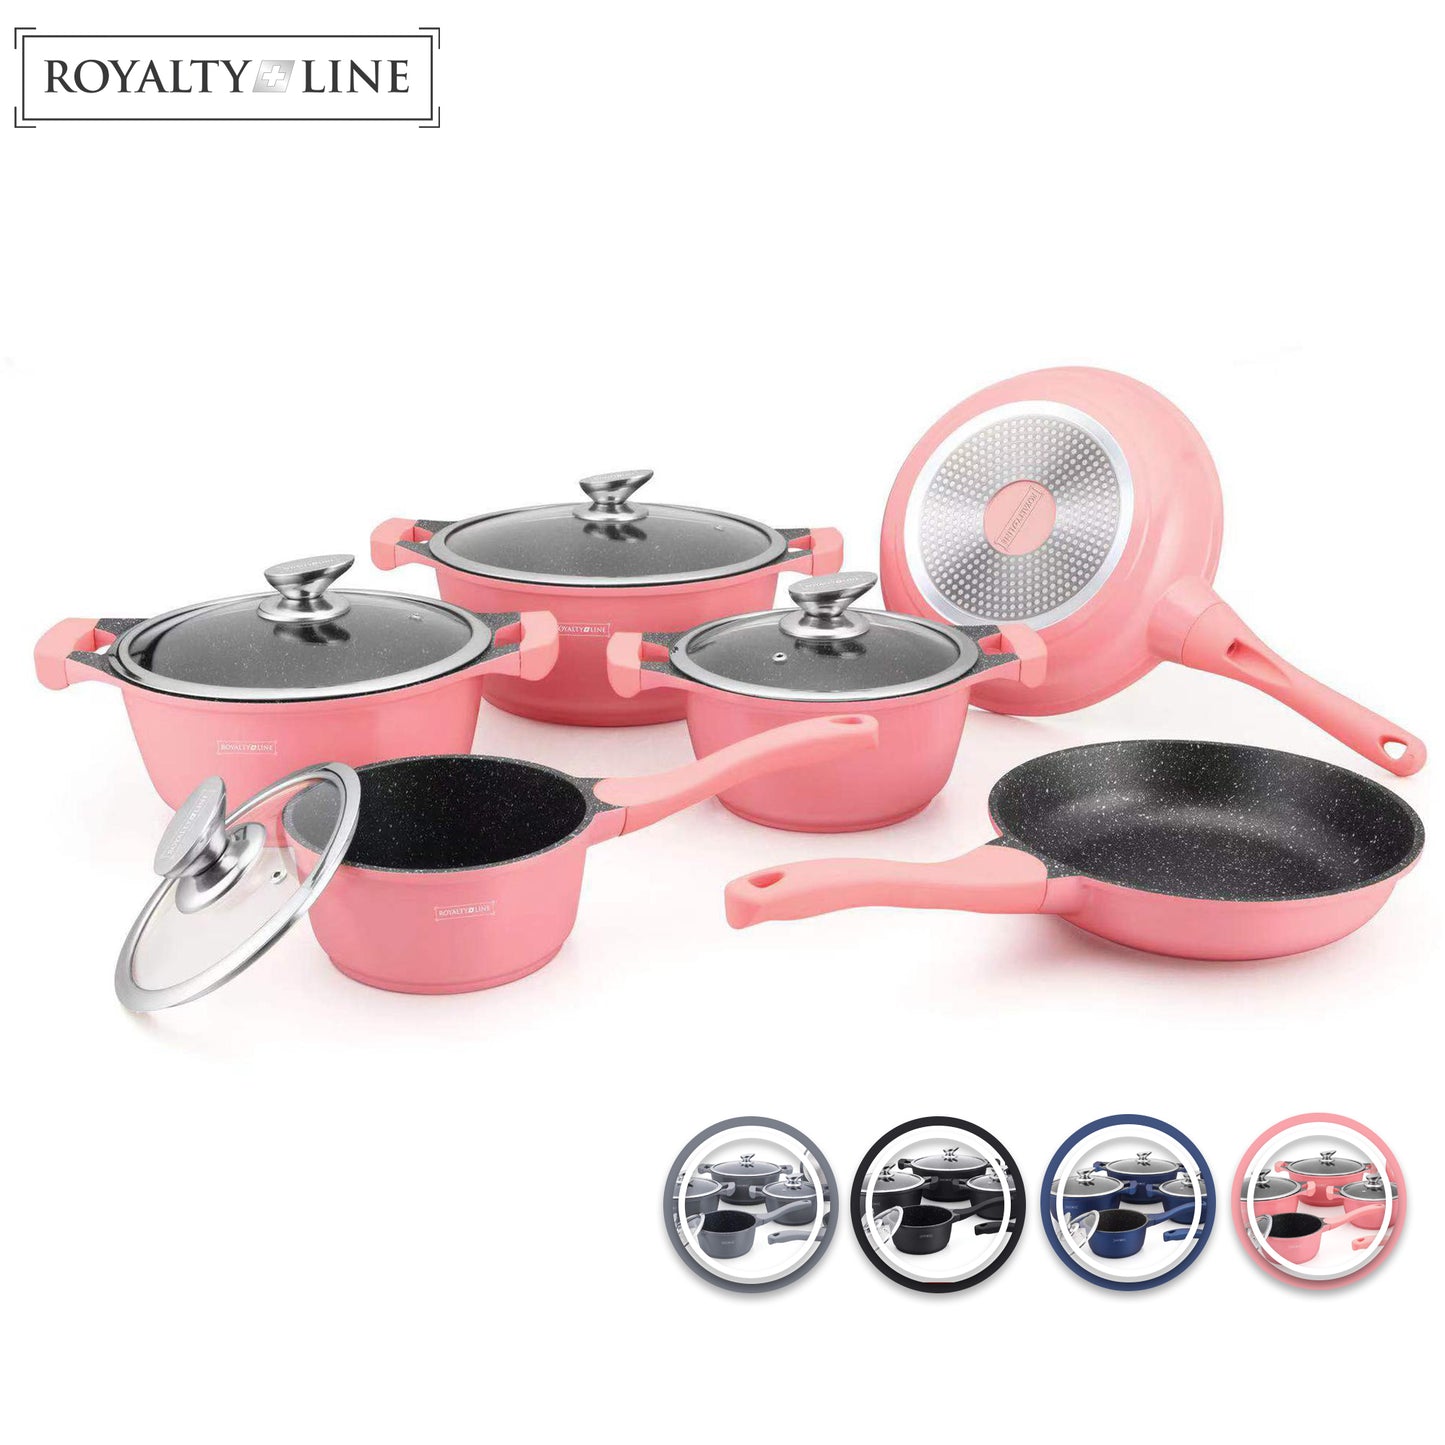 Royalty Line 10 Pieces Pot with Ceramic Coating Copper